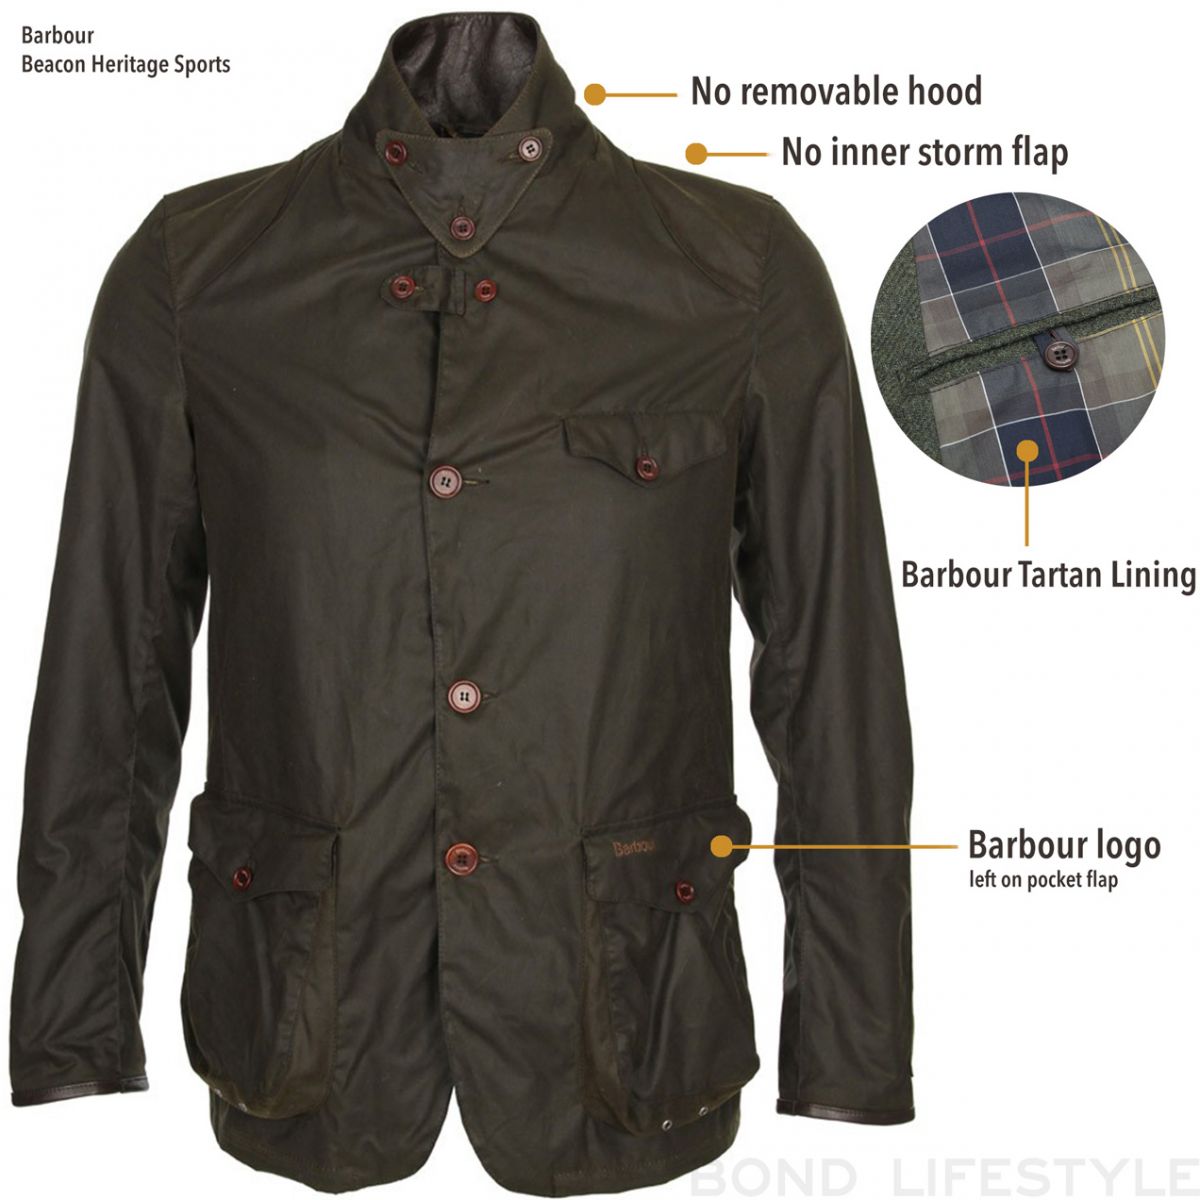 UPDATED 2020: Comparing the Barbour Beacon Heritage X To Ki To Sports ...